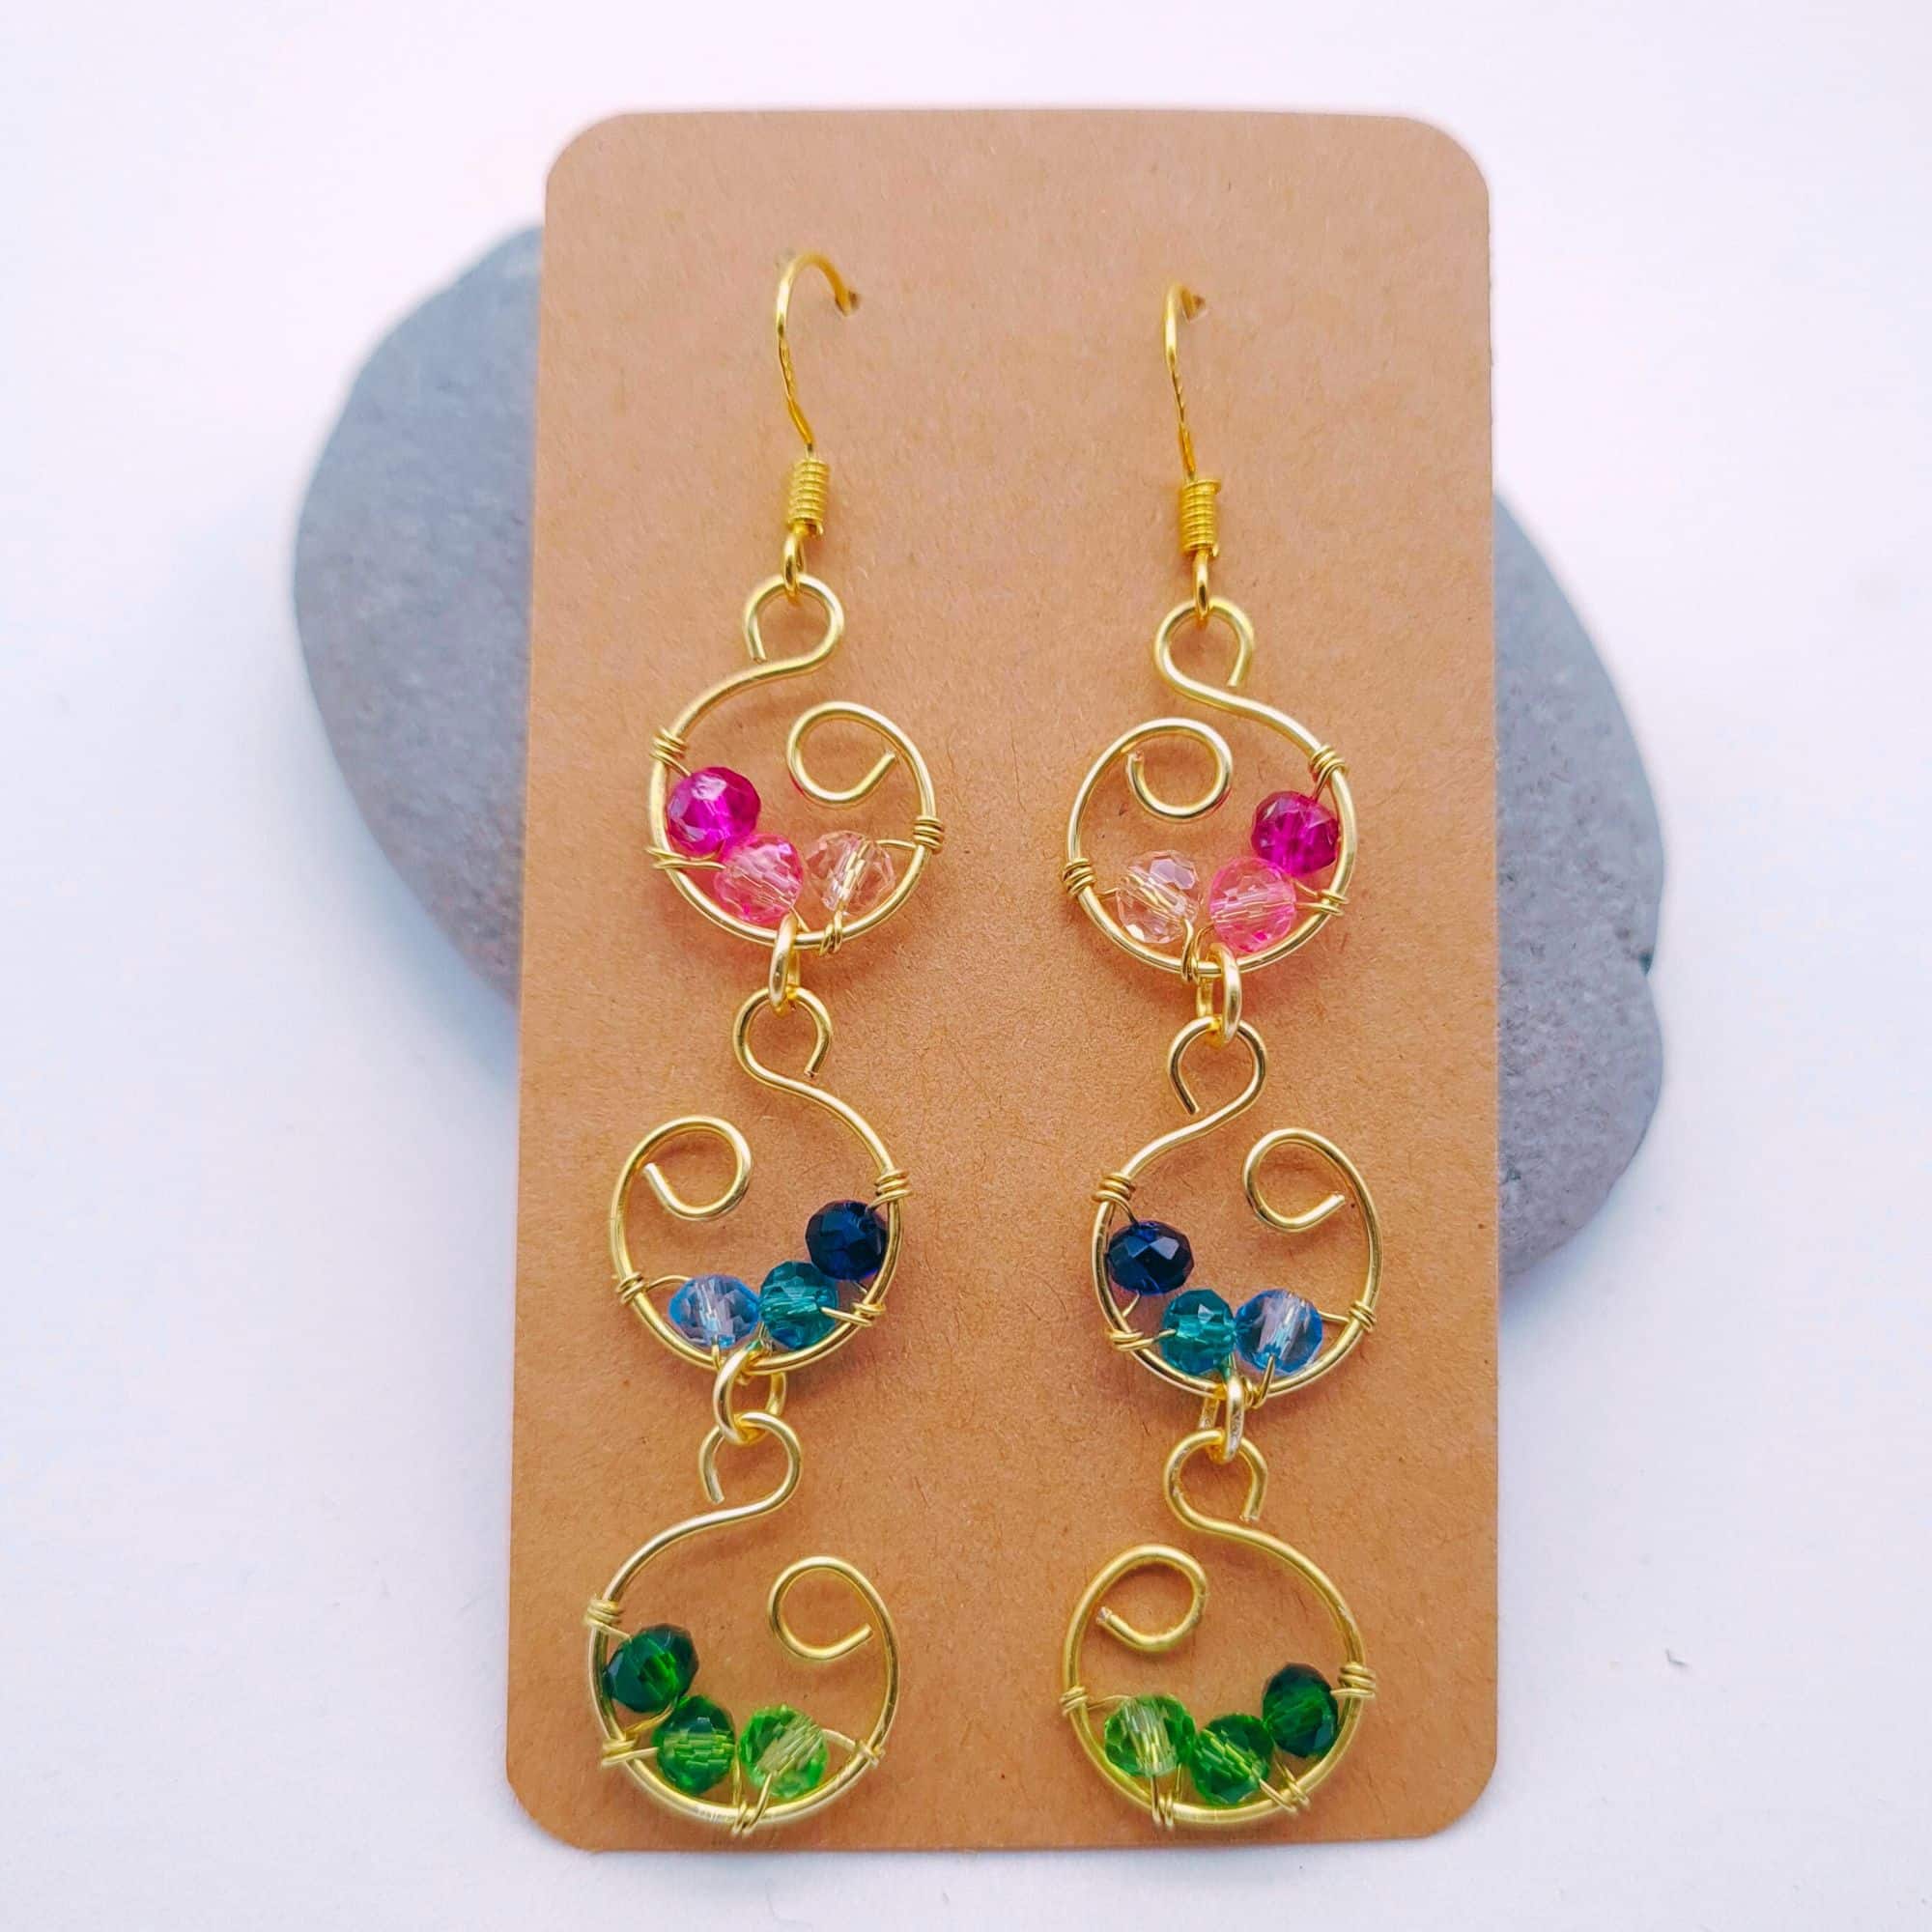 Handcrafted Multi Colour Dangle Earrings Gift for Her, Gift for Anniversary, Wedding Earrings - main product image